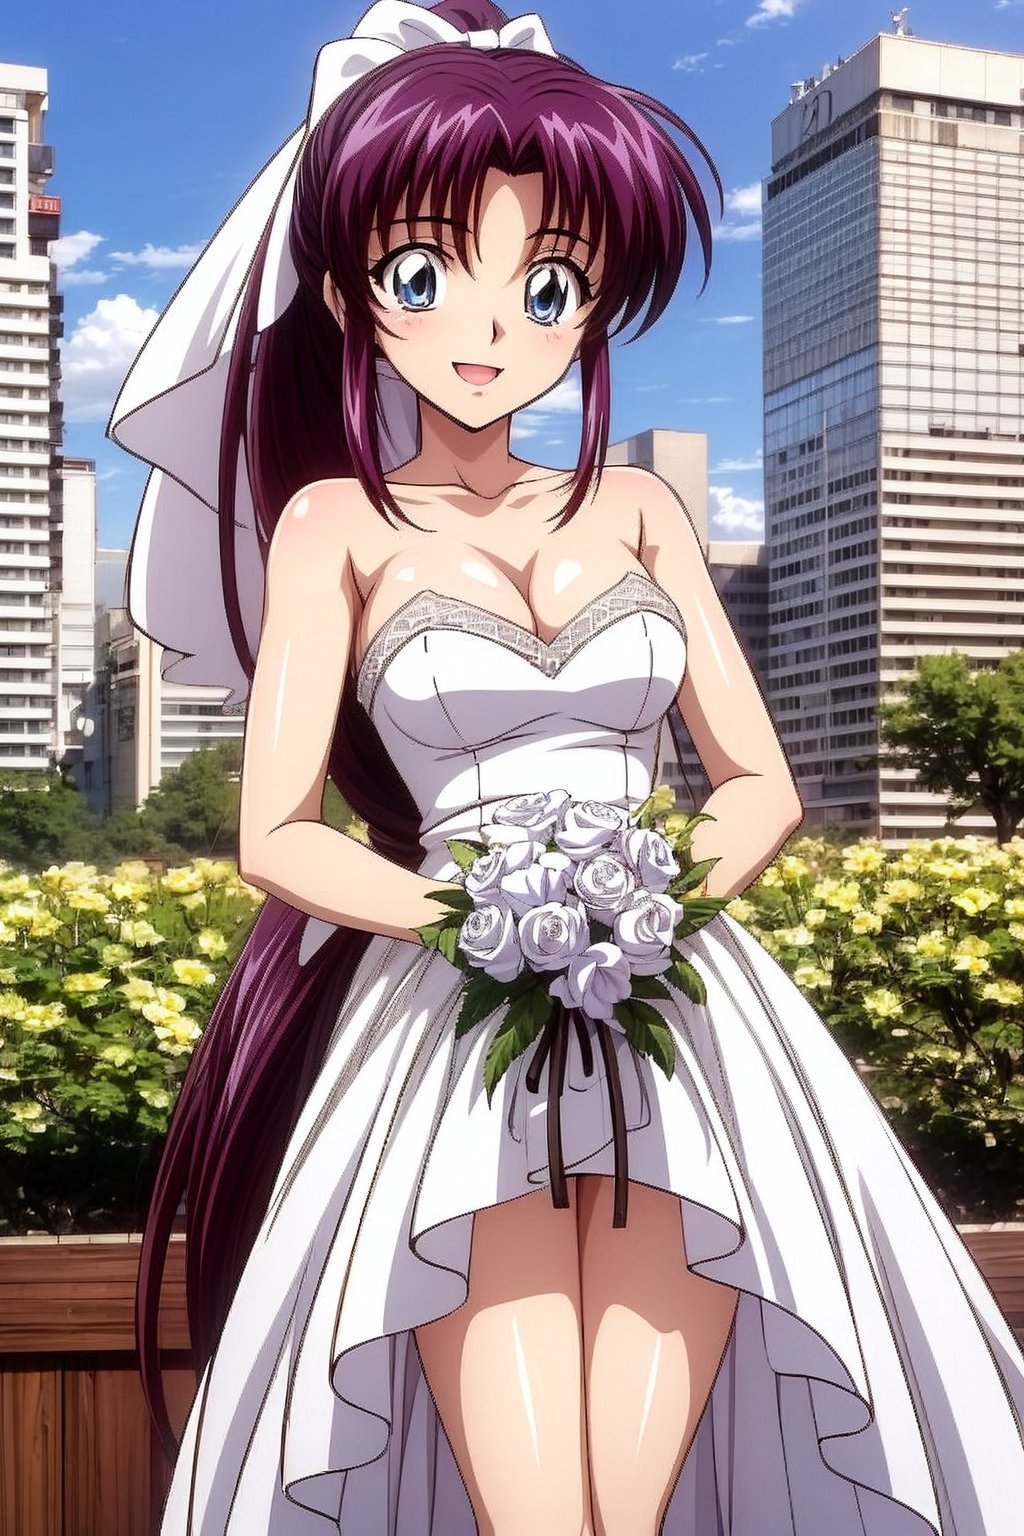 Kaimya kaoru 1996,beautiful 20 year old anime girl with: athletic body, long legs, (properly proportioned female body) , medium bust, blue eyes, black long hair tied in a ponytail; wearing a wedding dress with lace; smiling shyly, flowers in the hands; stop in half the city; in high quality, ,lace_pattern